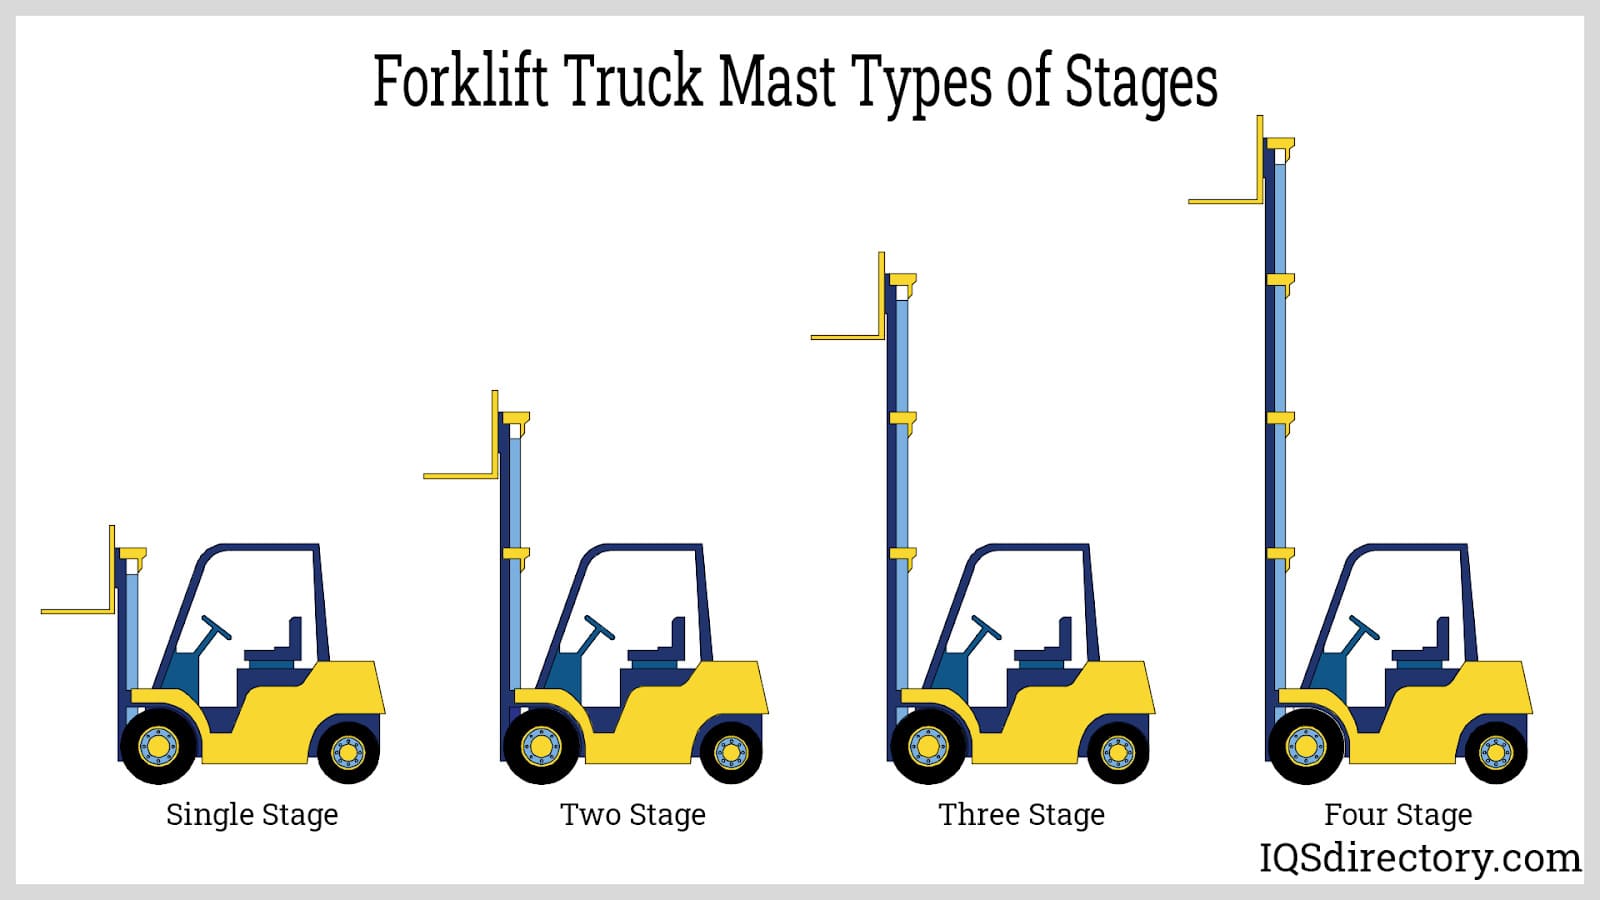 Forklift Truck Mast Types of Stages